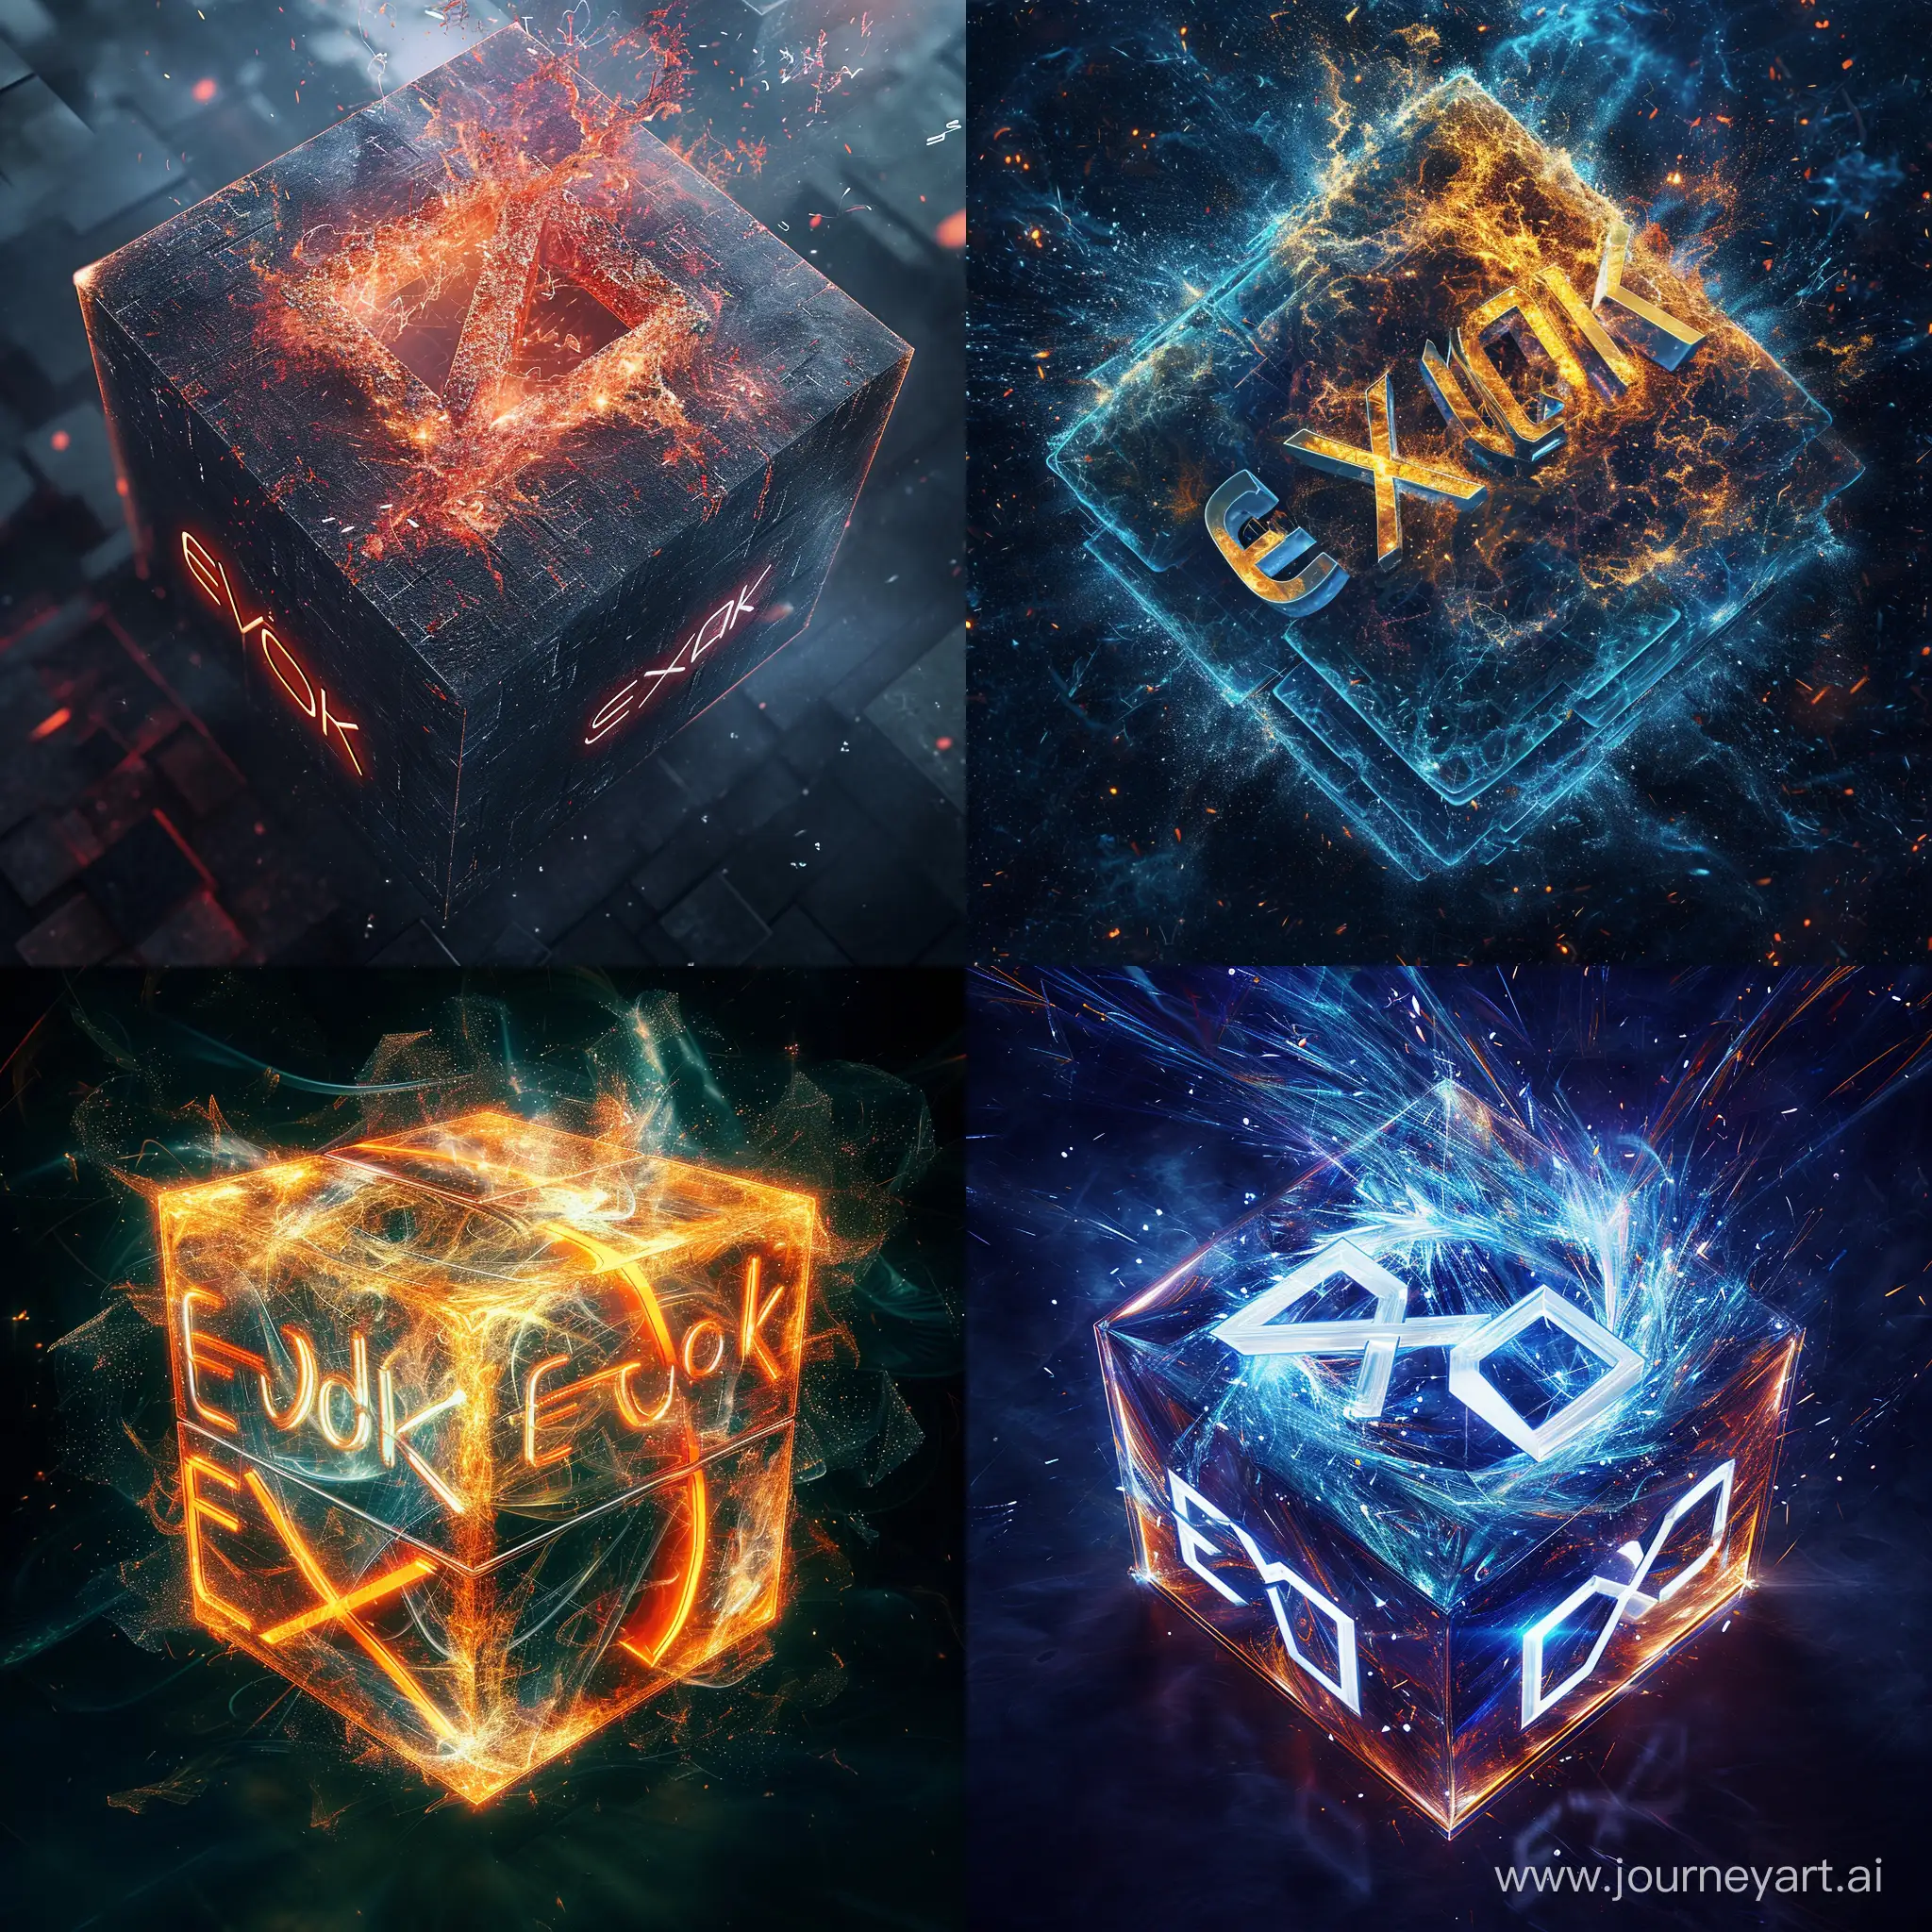 As the cube's core collapses in on itself, the letters "Evok" and "eXura" seem to come alive, swirling and shifting in a mesmerizing display of light and color.